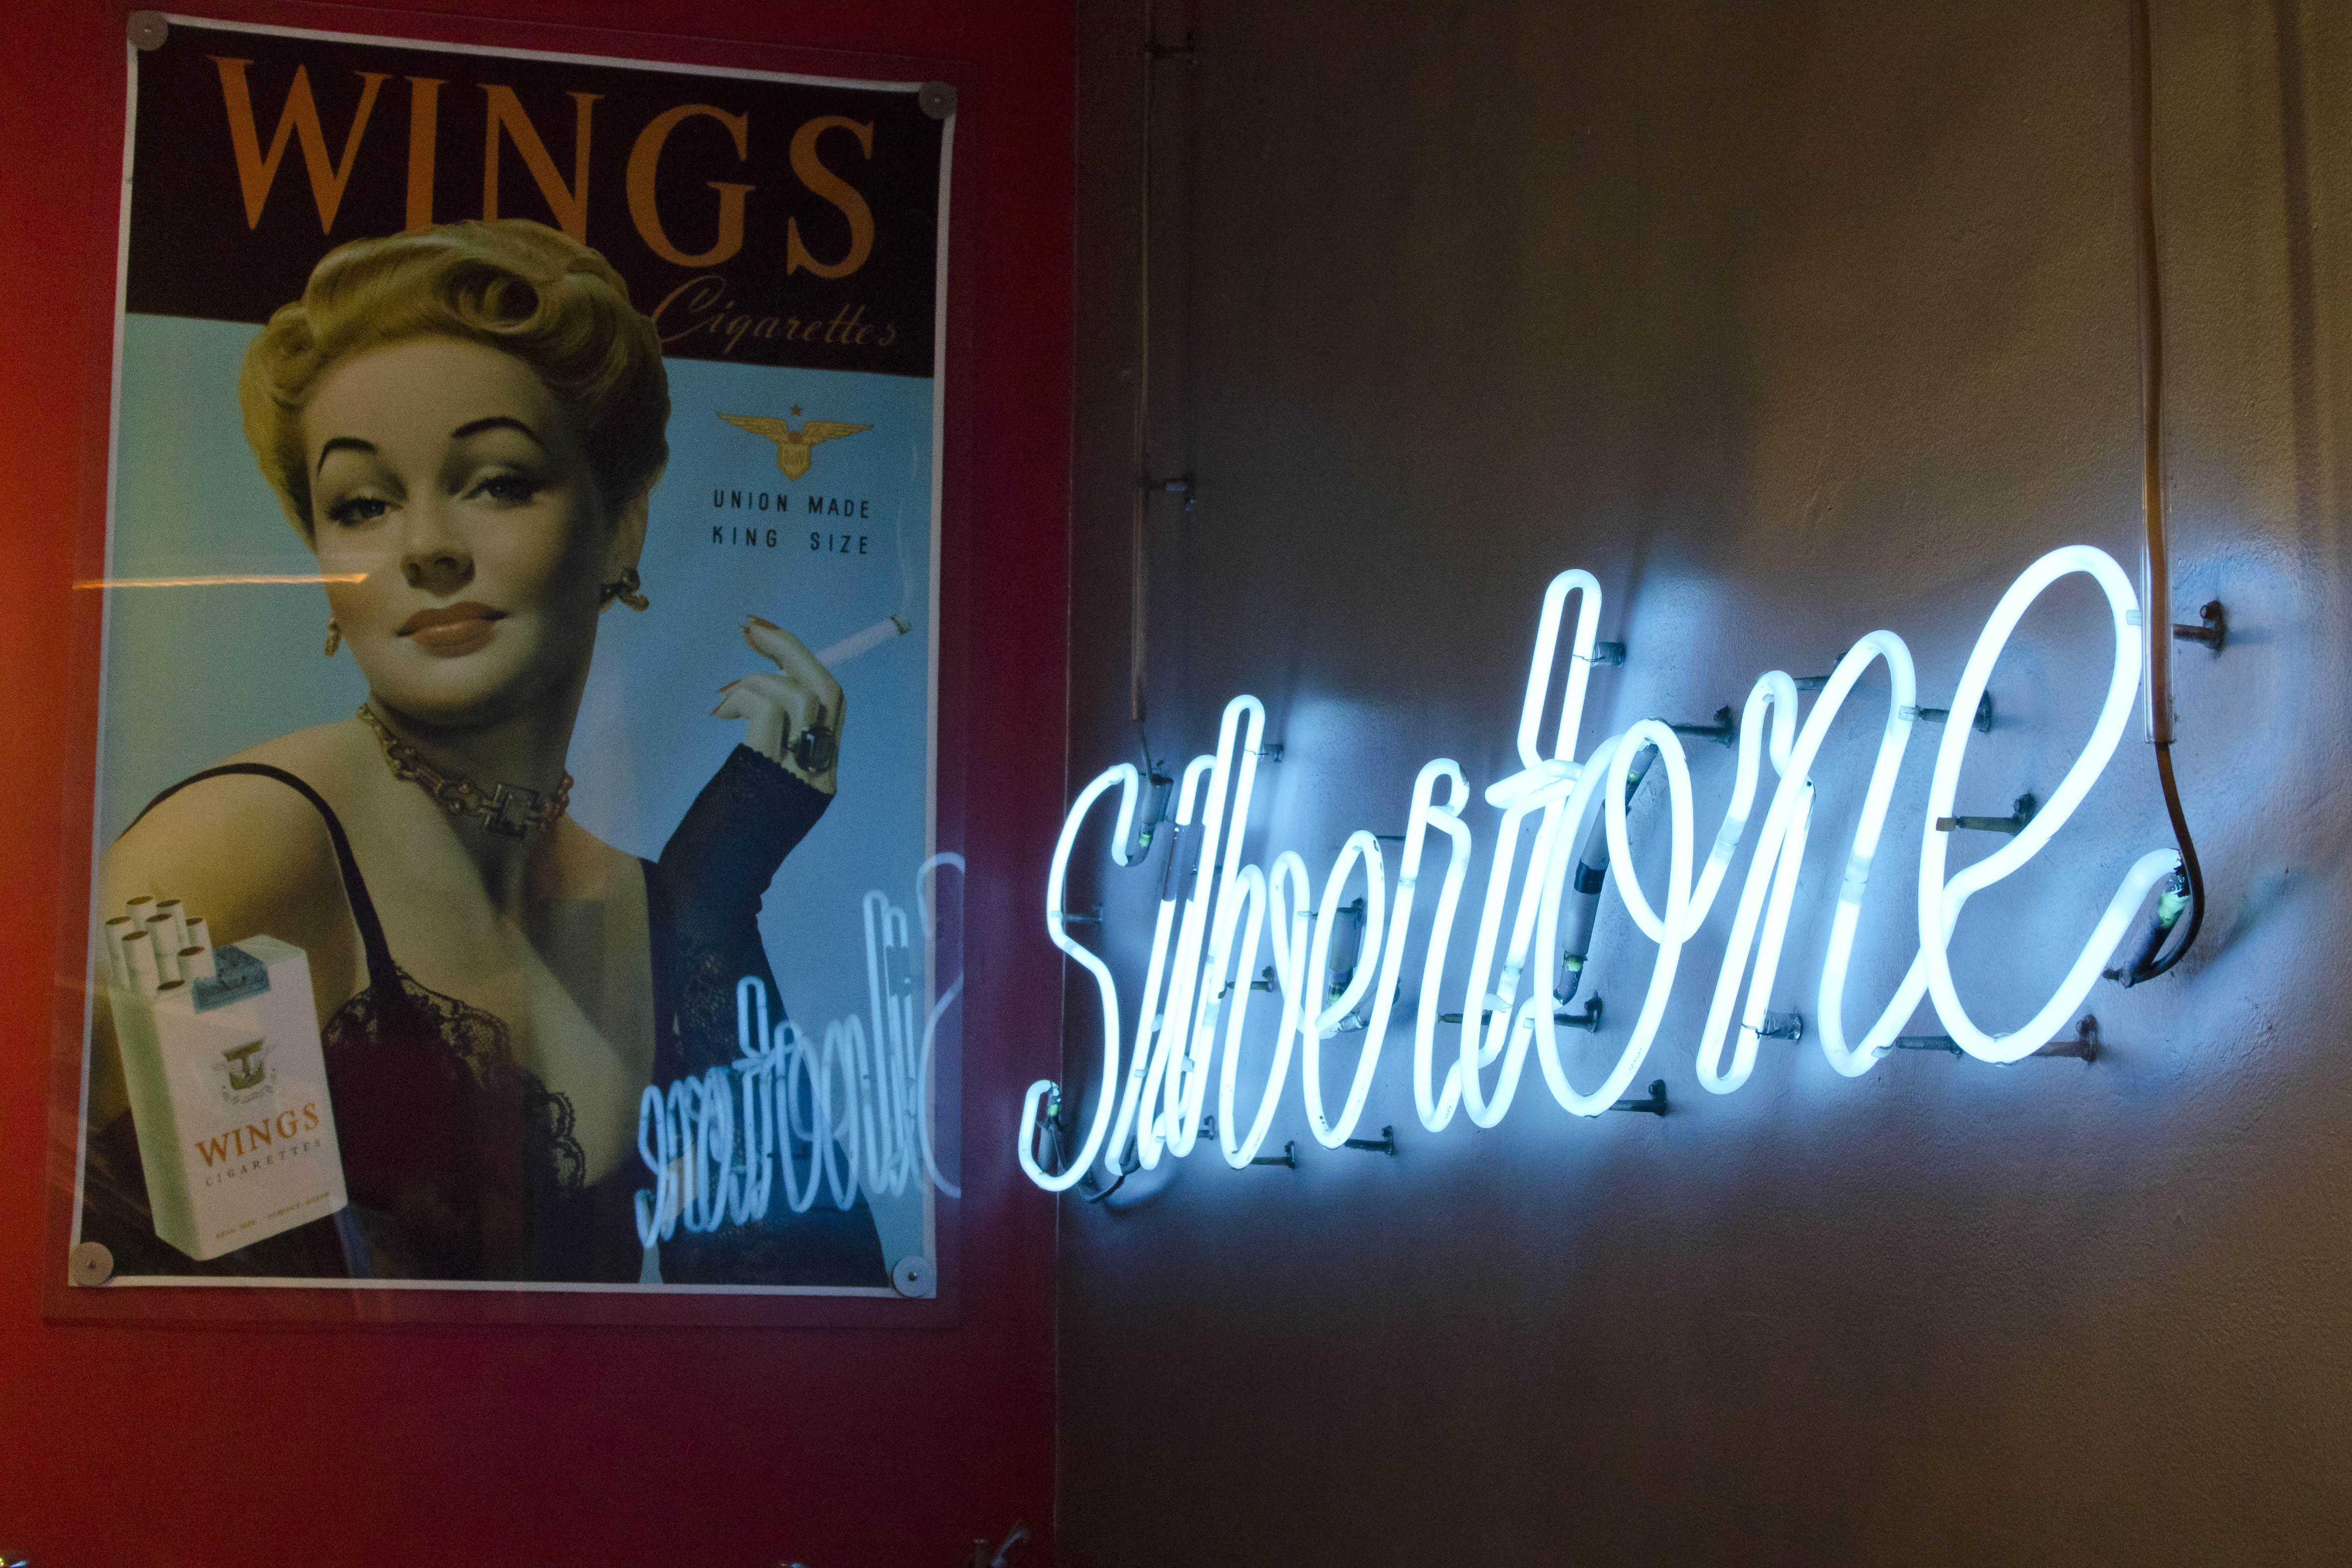 A vintage cigarette poster hangs on a red wall, across a corner from a blue neon sign that reads Silvertone.